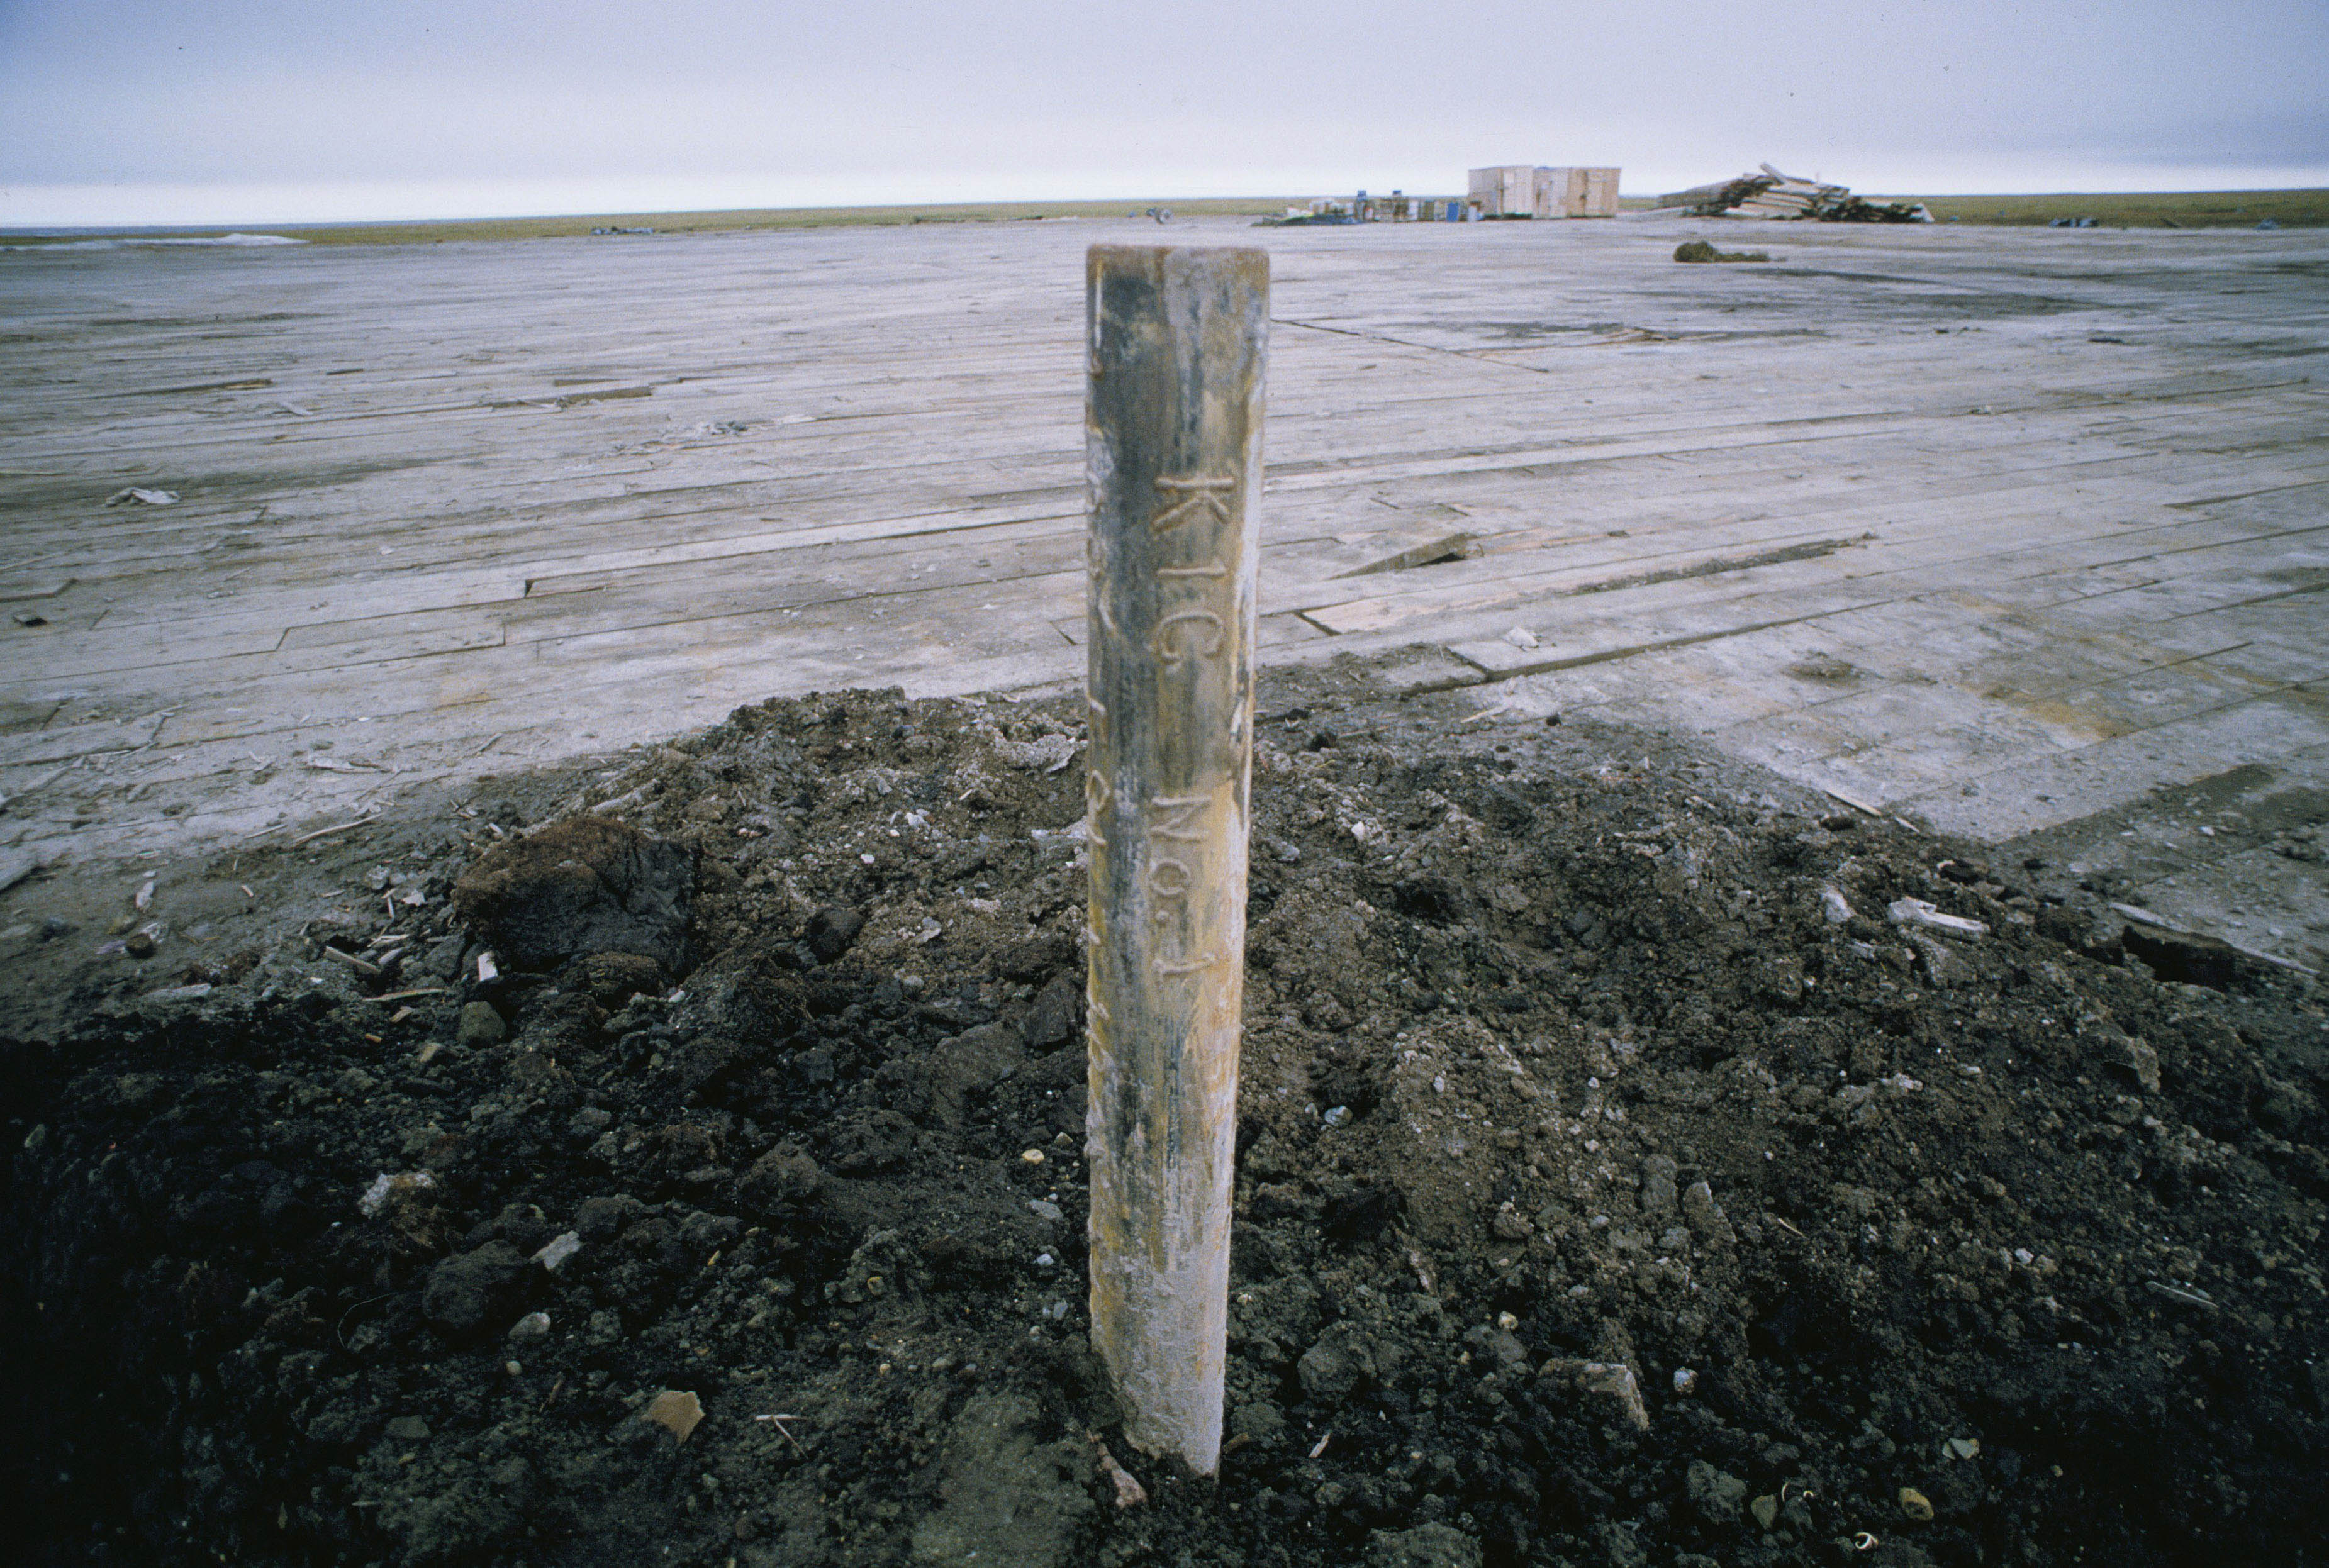 Well head of the KIC #1 exploratory well (with drilling platform in the background) on the Arctic Coastal Plain in ANWR near the Jago River, July 16, 1986. (Fran Durner / ADN archive 1986)